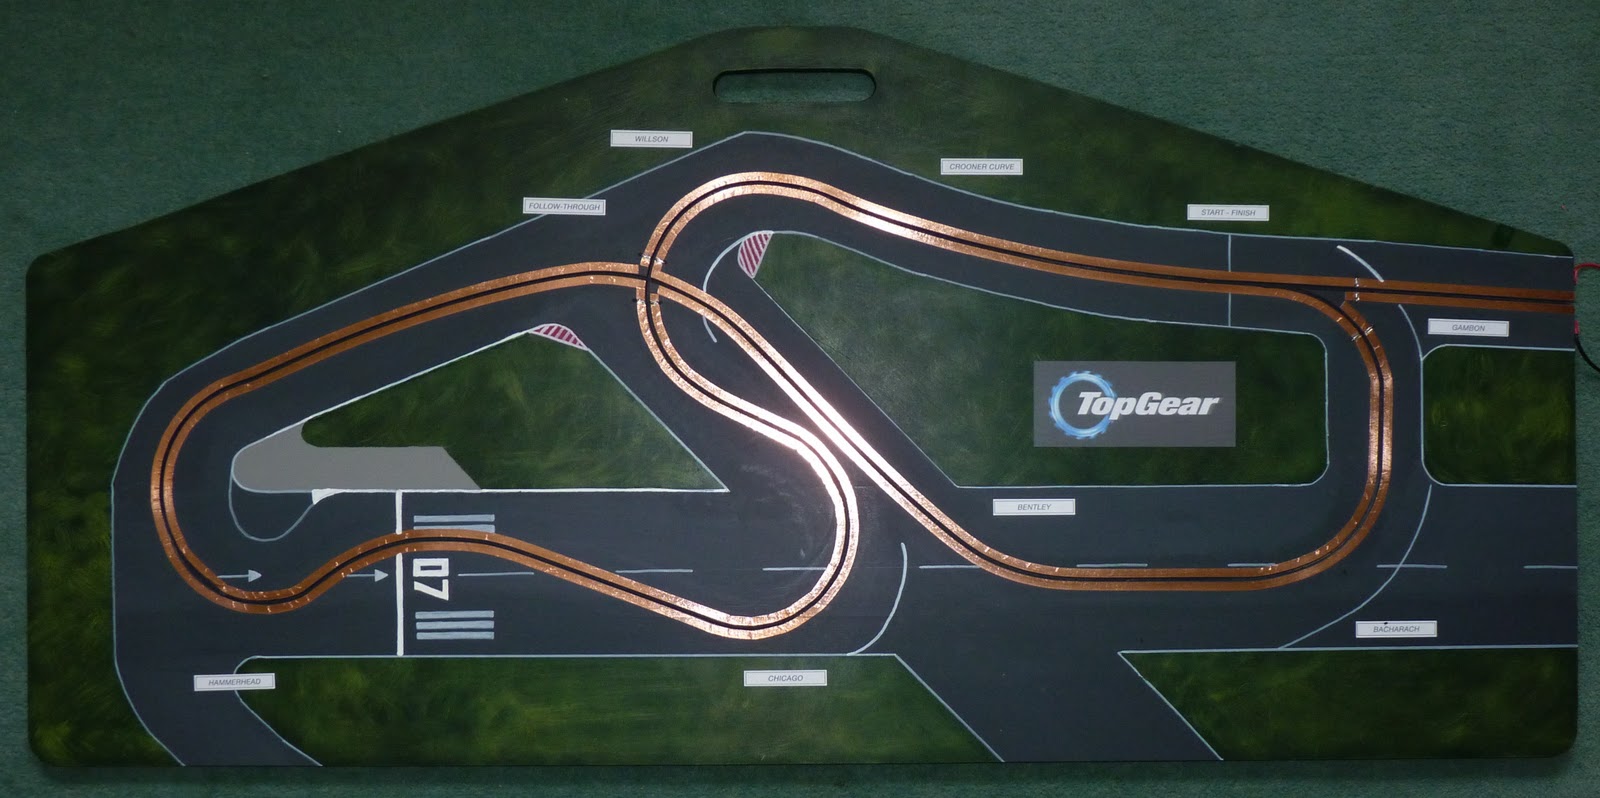 maternal Ydmyge hegn My Scalextric: Top Gear Test Track - Part Five: Detailing (Final)